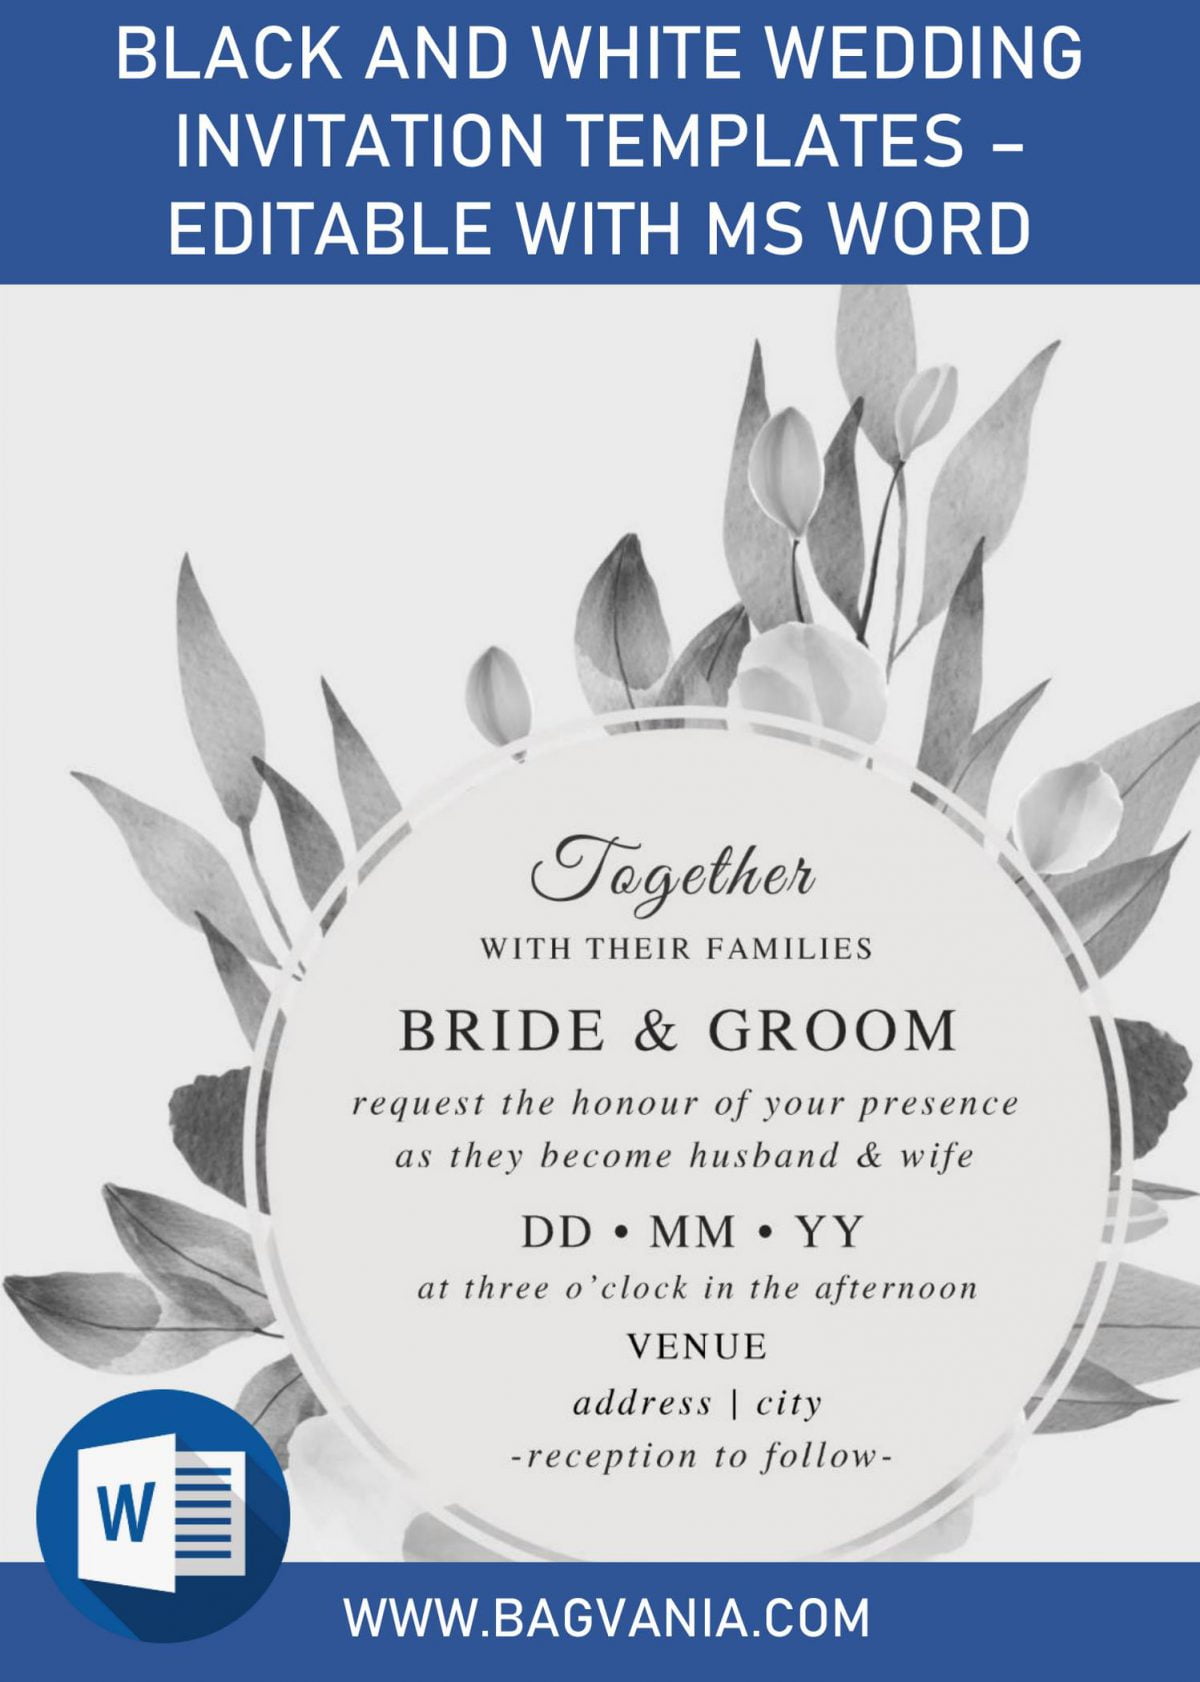 Black And White Wedding Invitation Templates - Editable With MS Word and has 